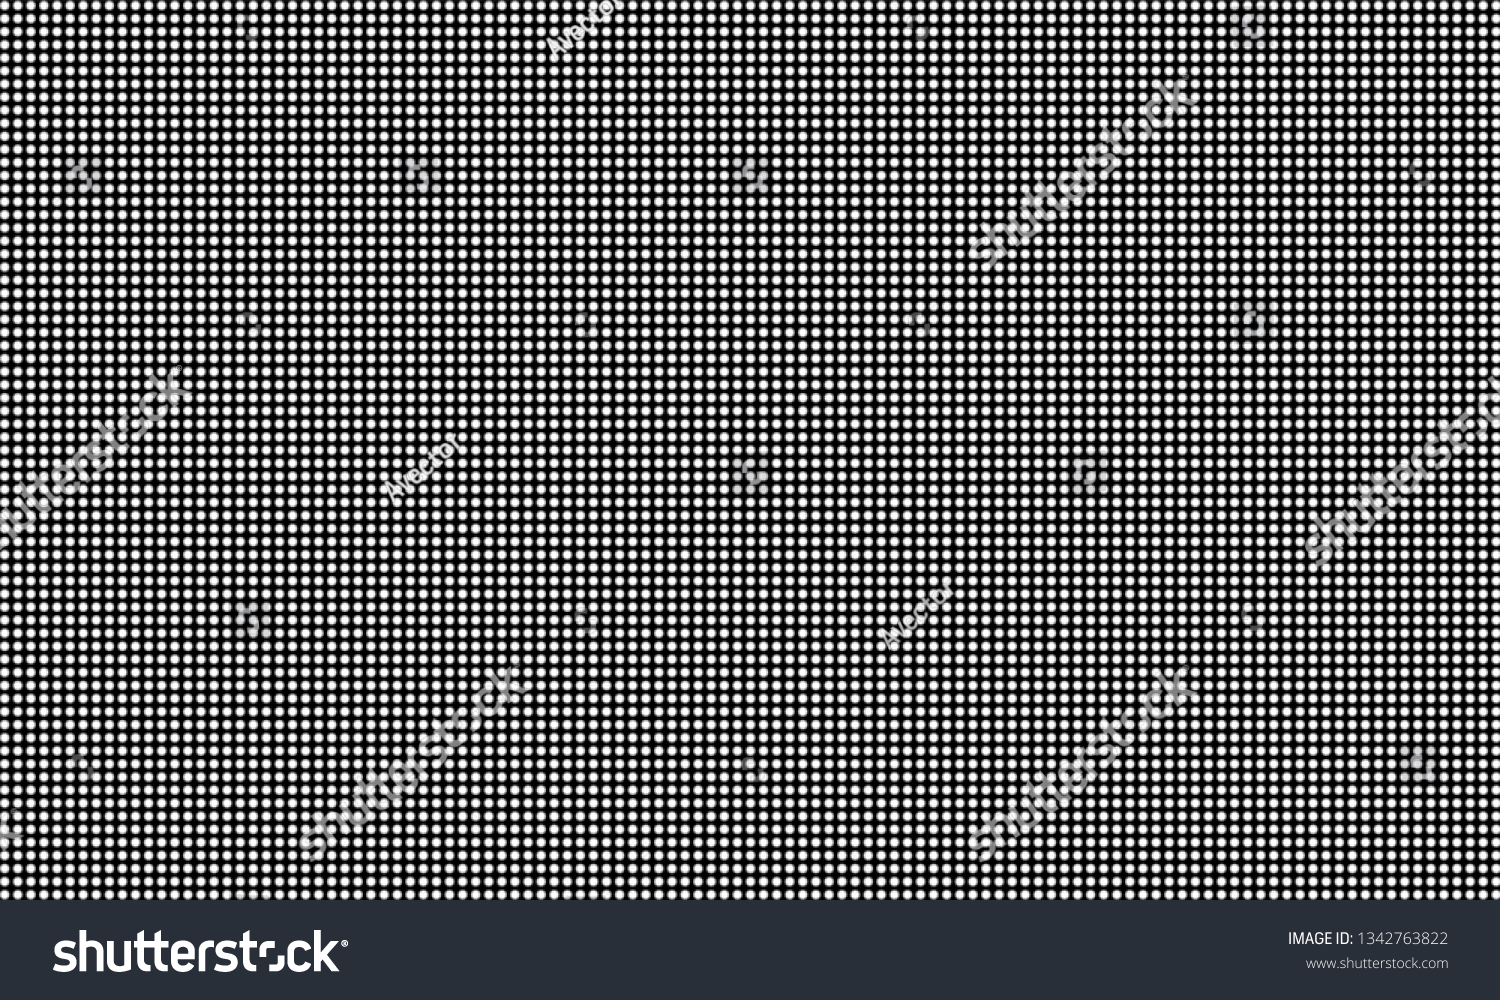 SVG of Led video wall screen, diode dot grid texture. Vector digital video panel mesh pattern background svg